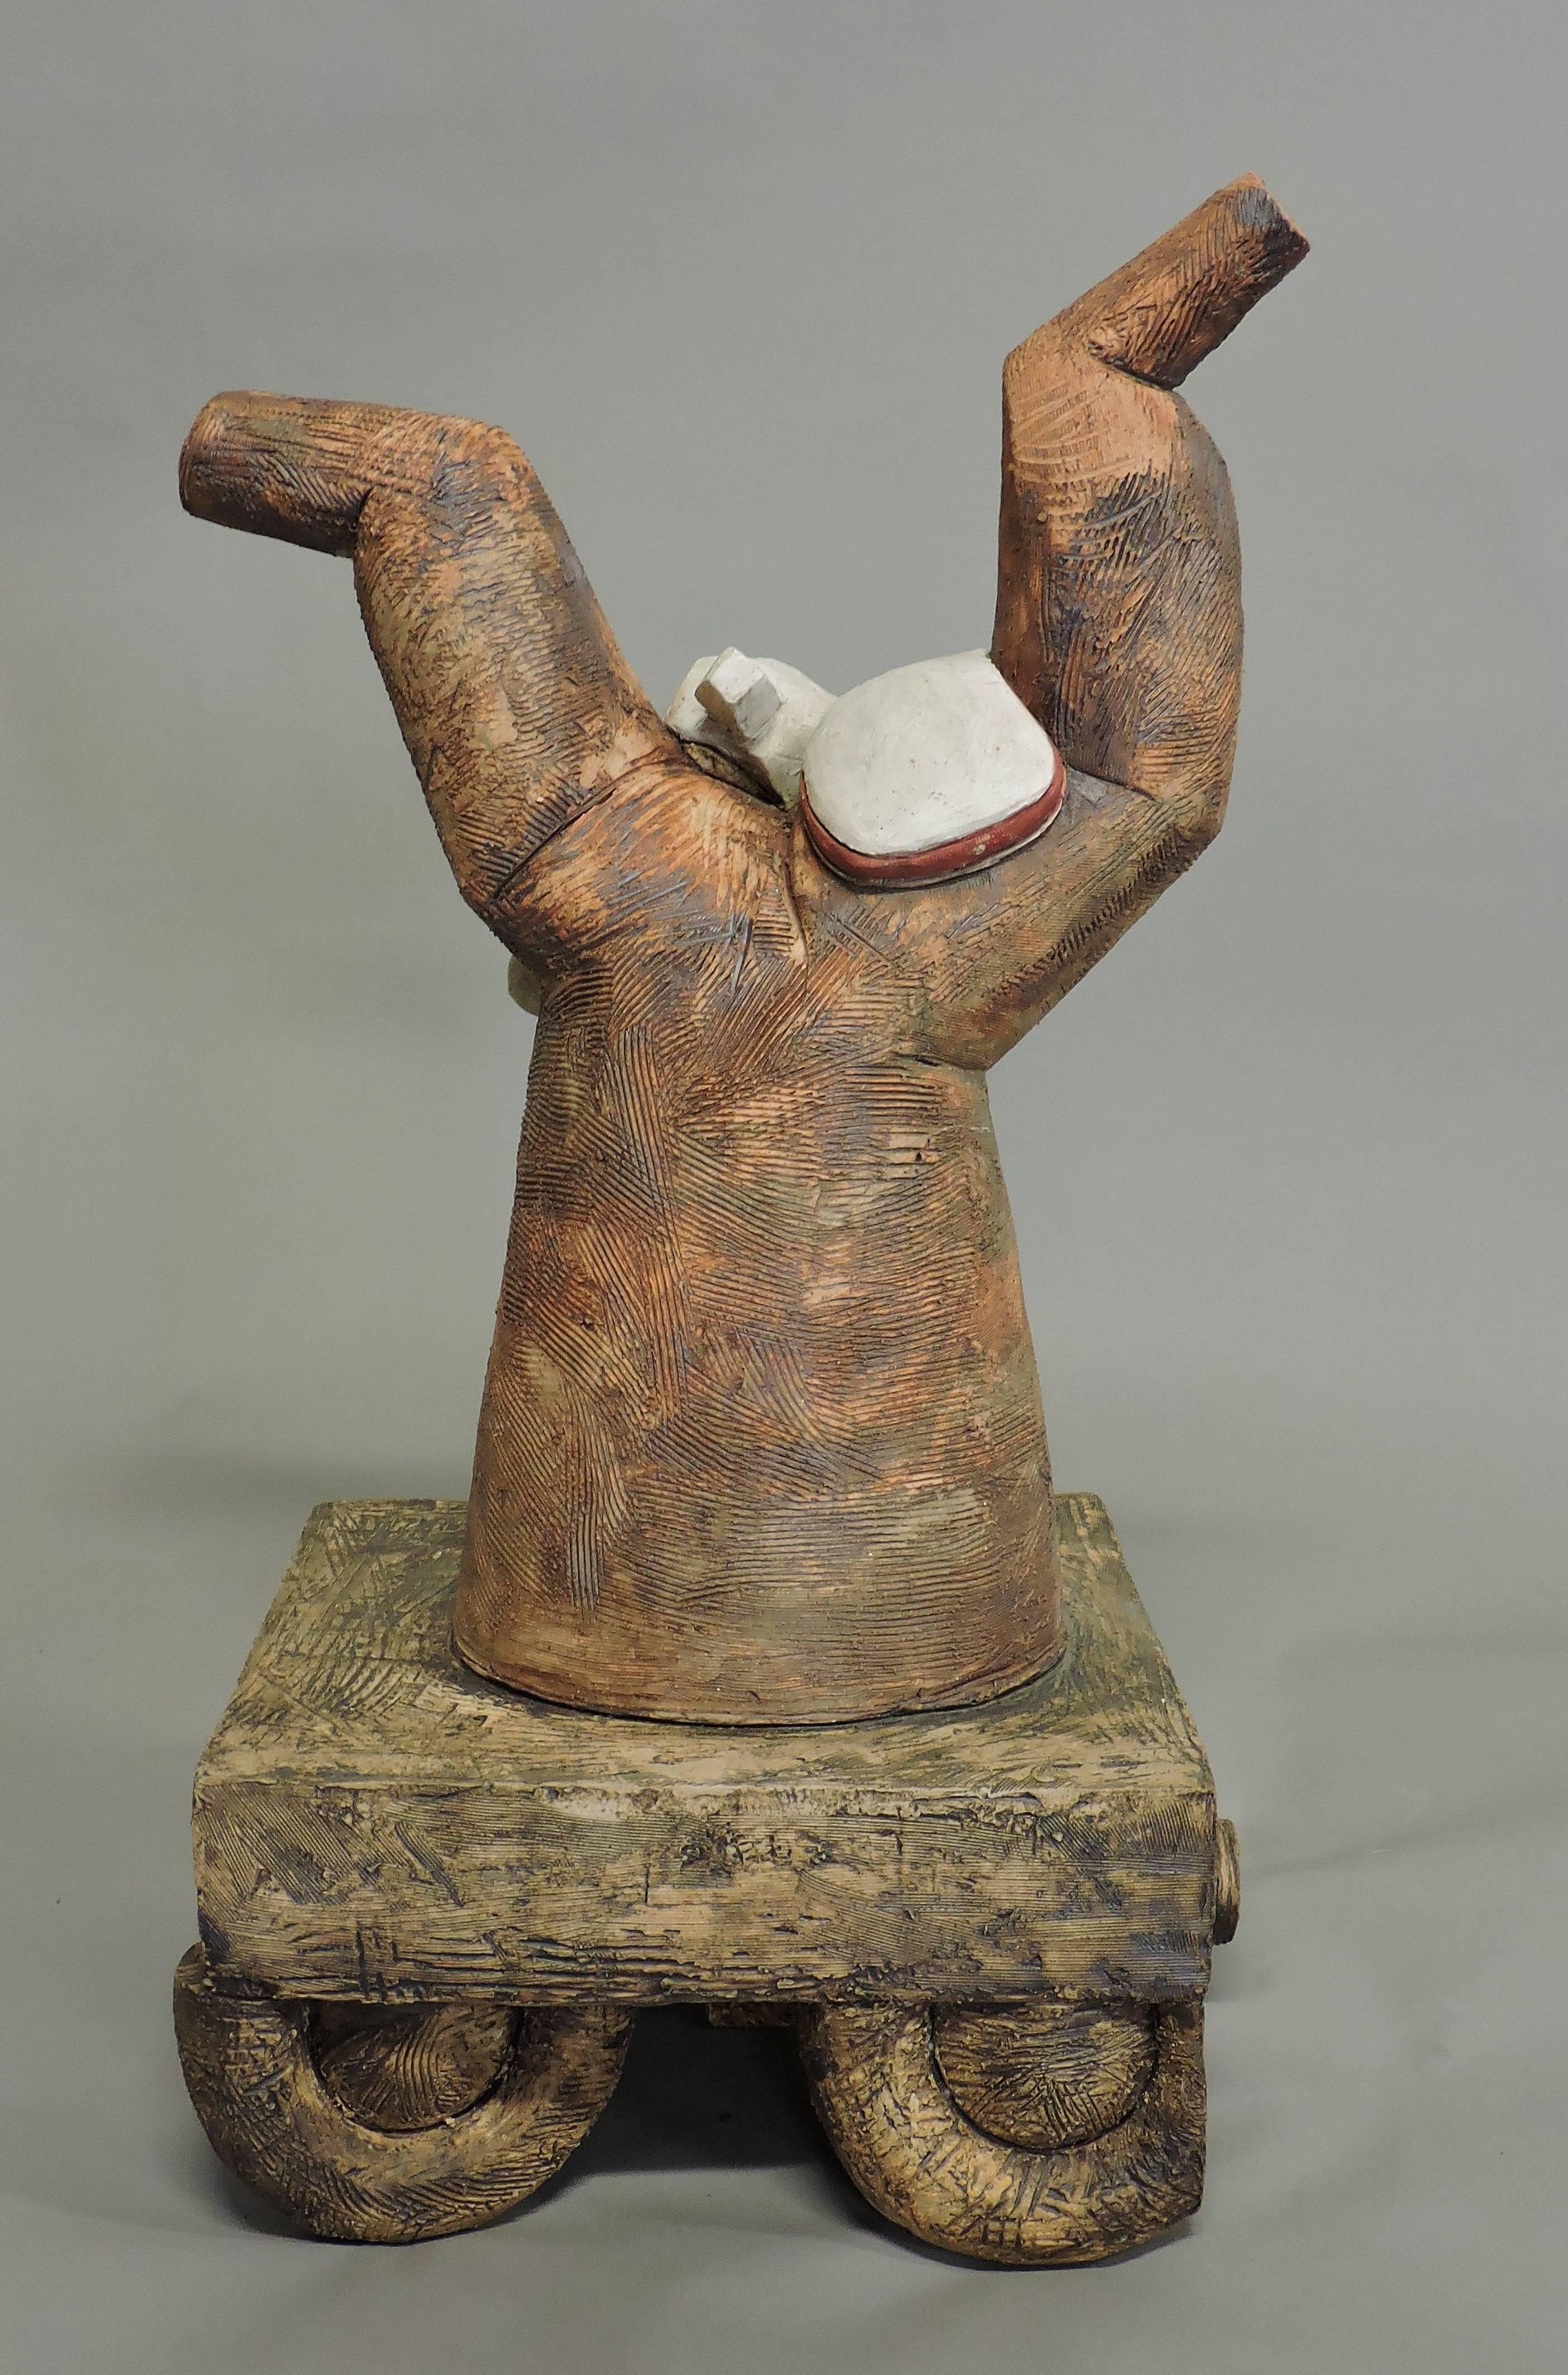 Whimsical Modern Ceramic and Plaster Sculptures by Scott Rosenthal In Excellent Condition For Sale In Chesterfield, NJ